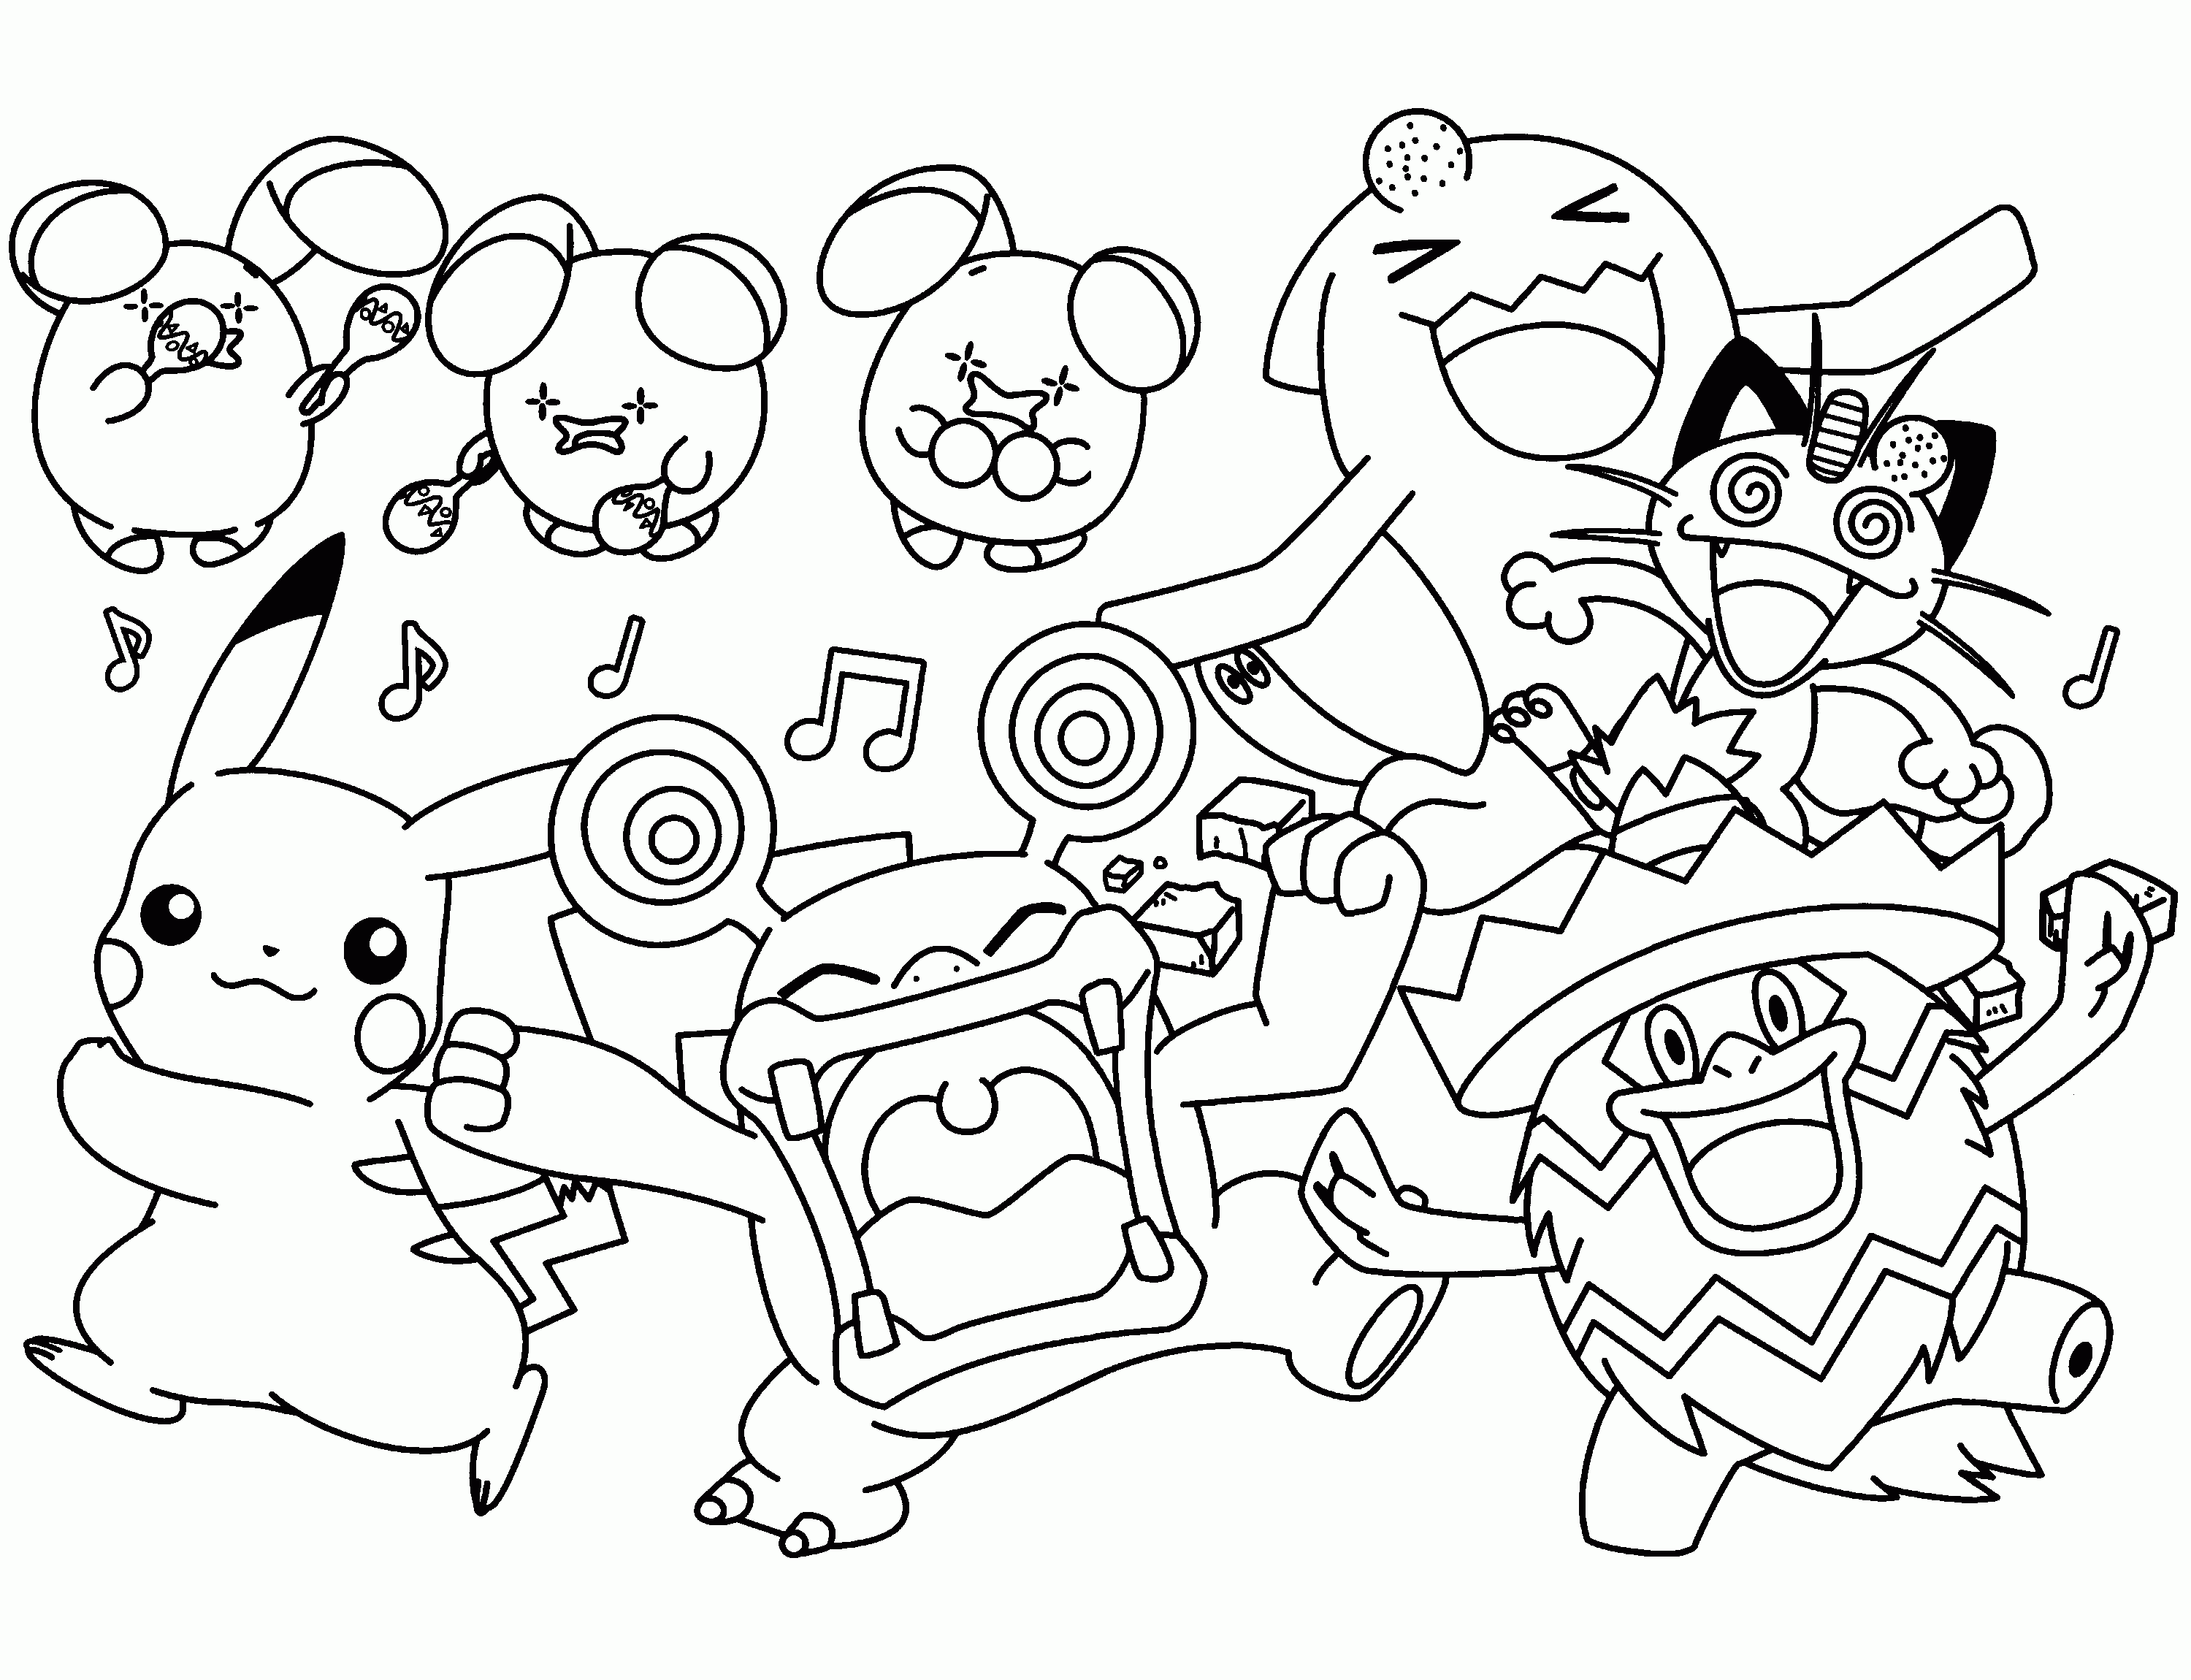 Pokemon free to color for children   All Pokemon coloring pages ...